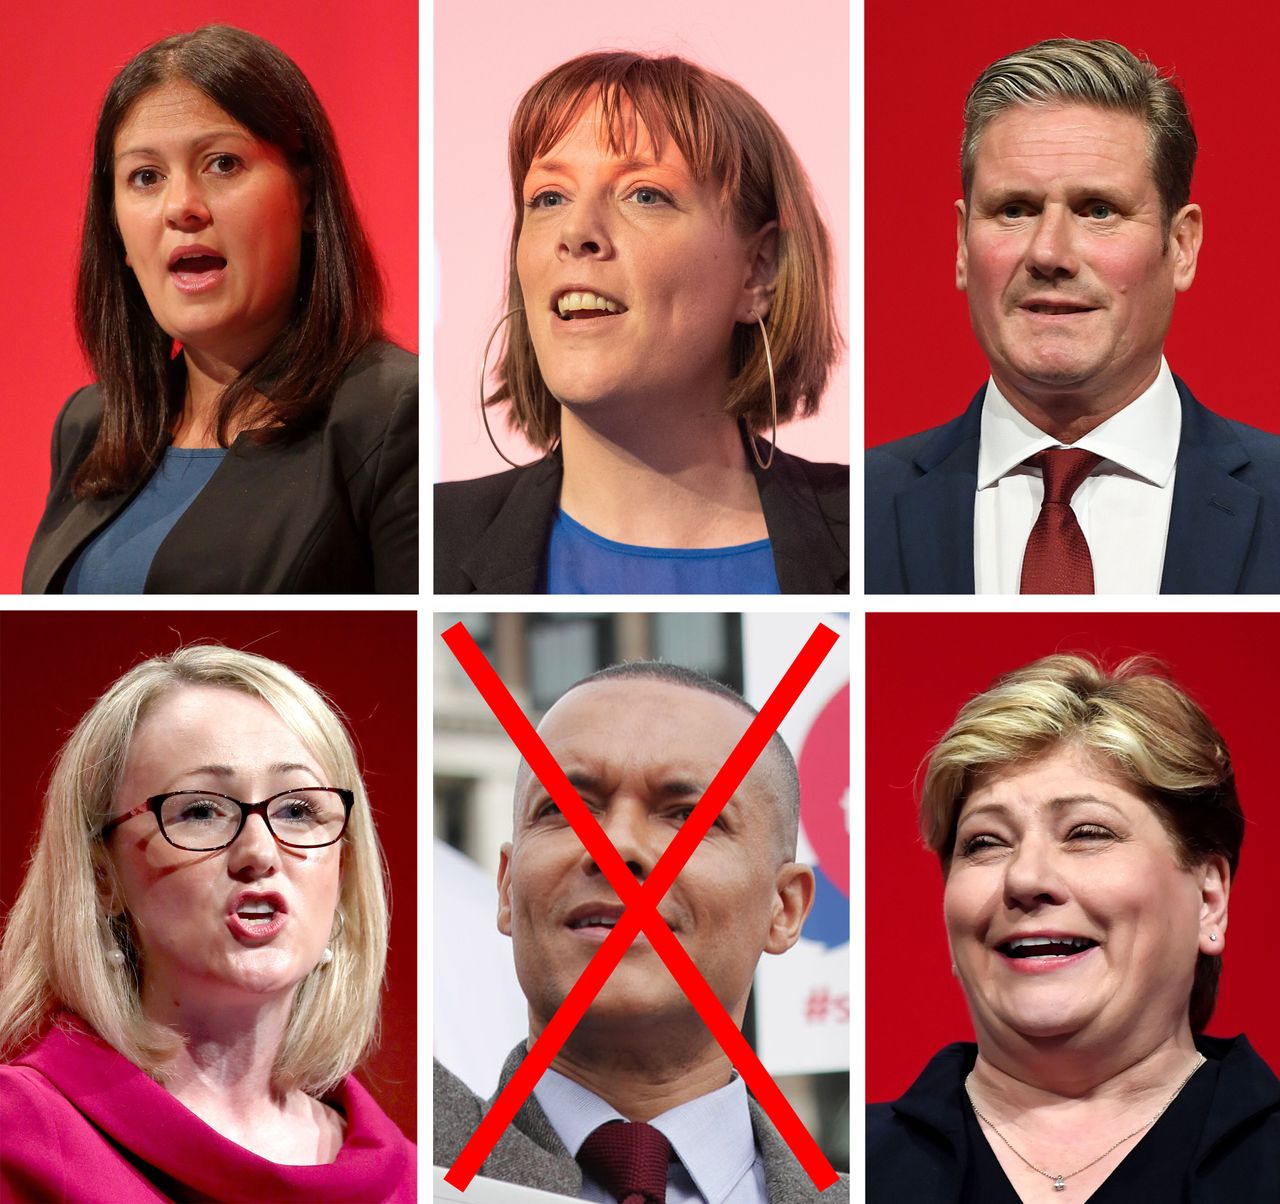 File photos of (left to right) Labour MPs Lisa Nandy, Jess Phillips, Keir Starmer, Rebecca Long-Bailey, Clive Lewis and Emily Thornberry. Mr Lewis has abandoned his leadership bid for the party after falling short of the 22 nominations necessary from his fellow MPs.